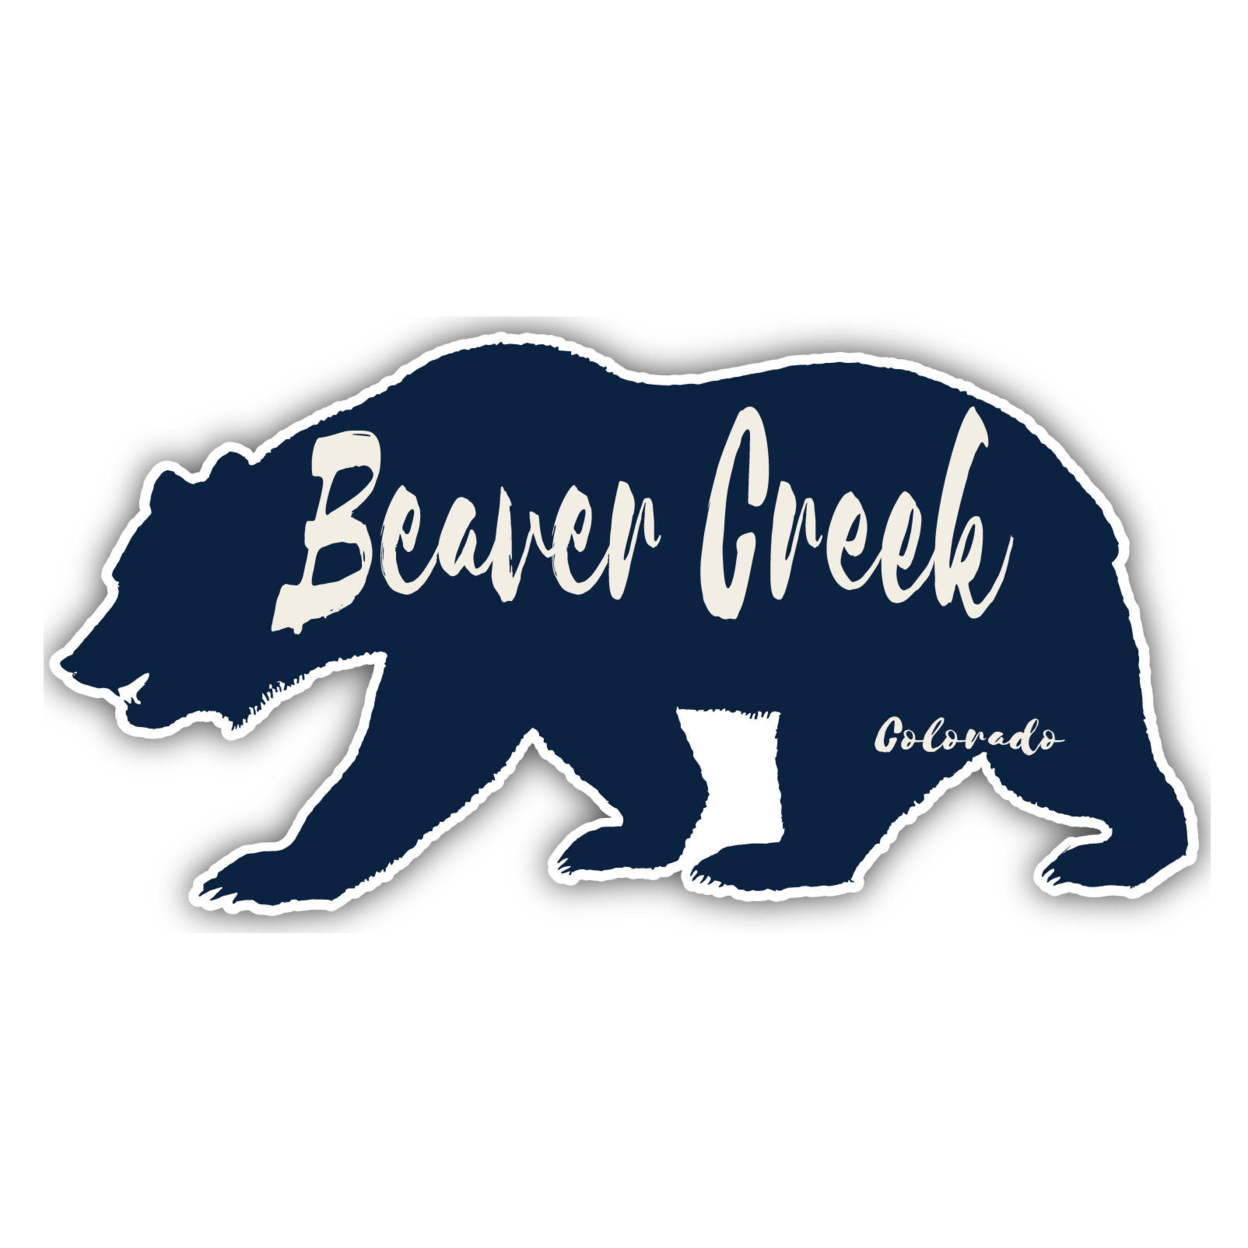 Beaver Creek Colorado Souvenir Decorative Stickers (Choose Theme And Size) - 4-Pack, 10-Inch, Great Outdoors